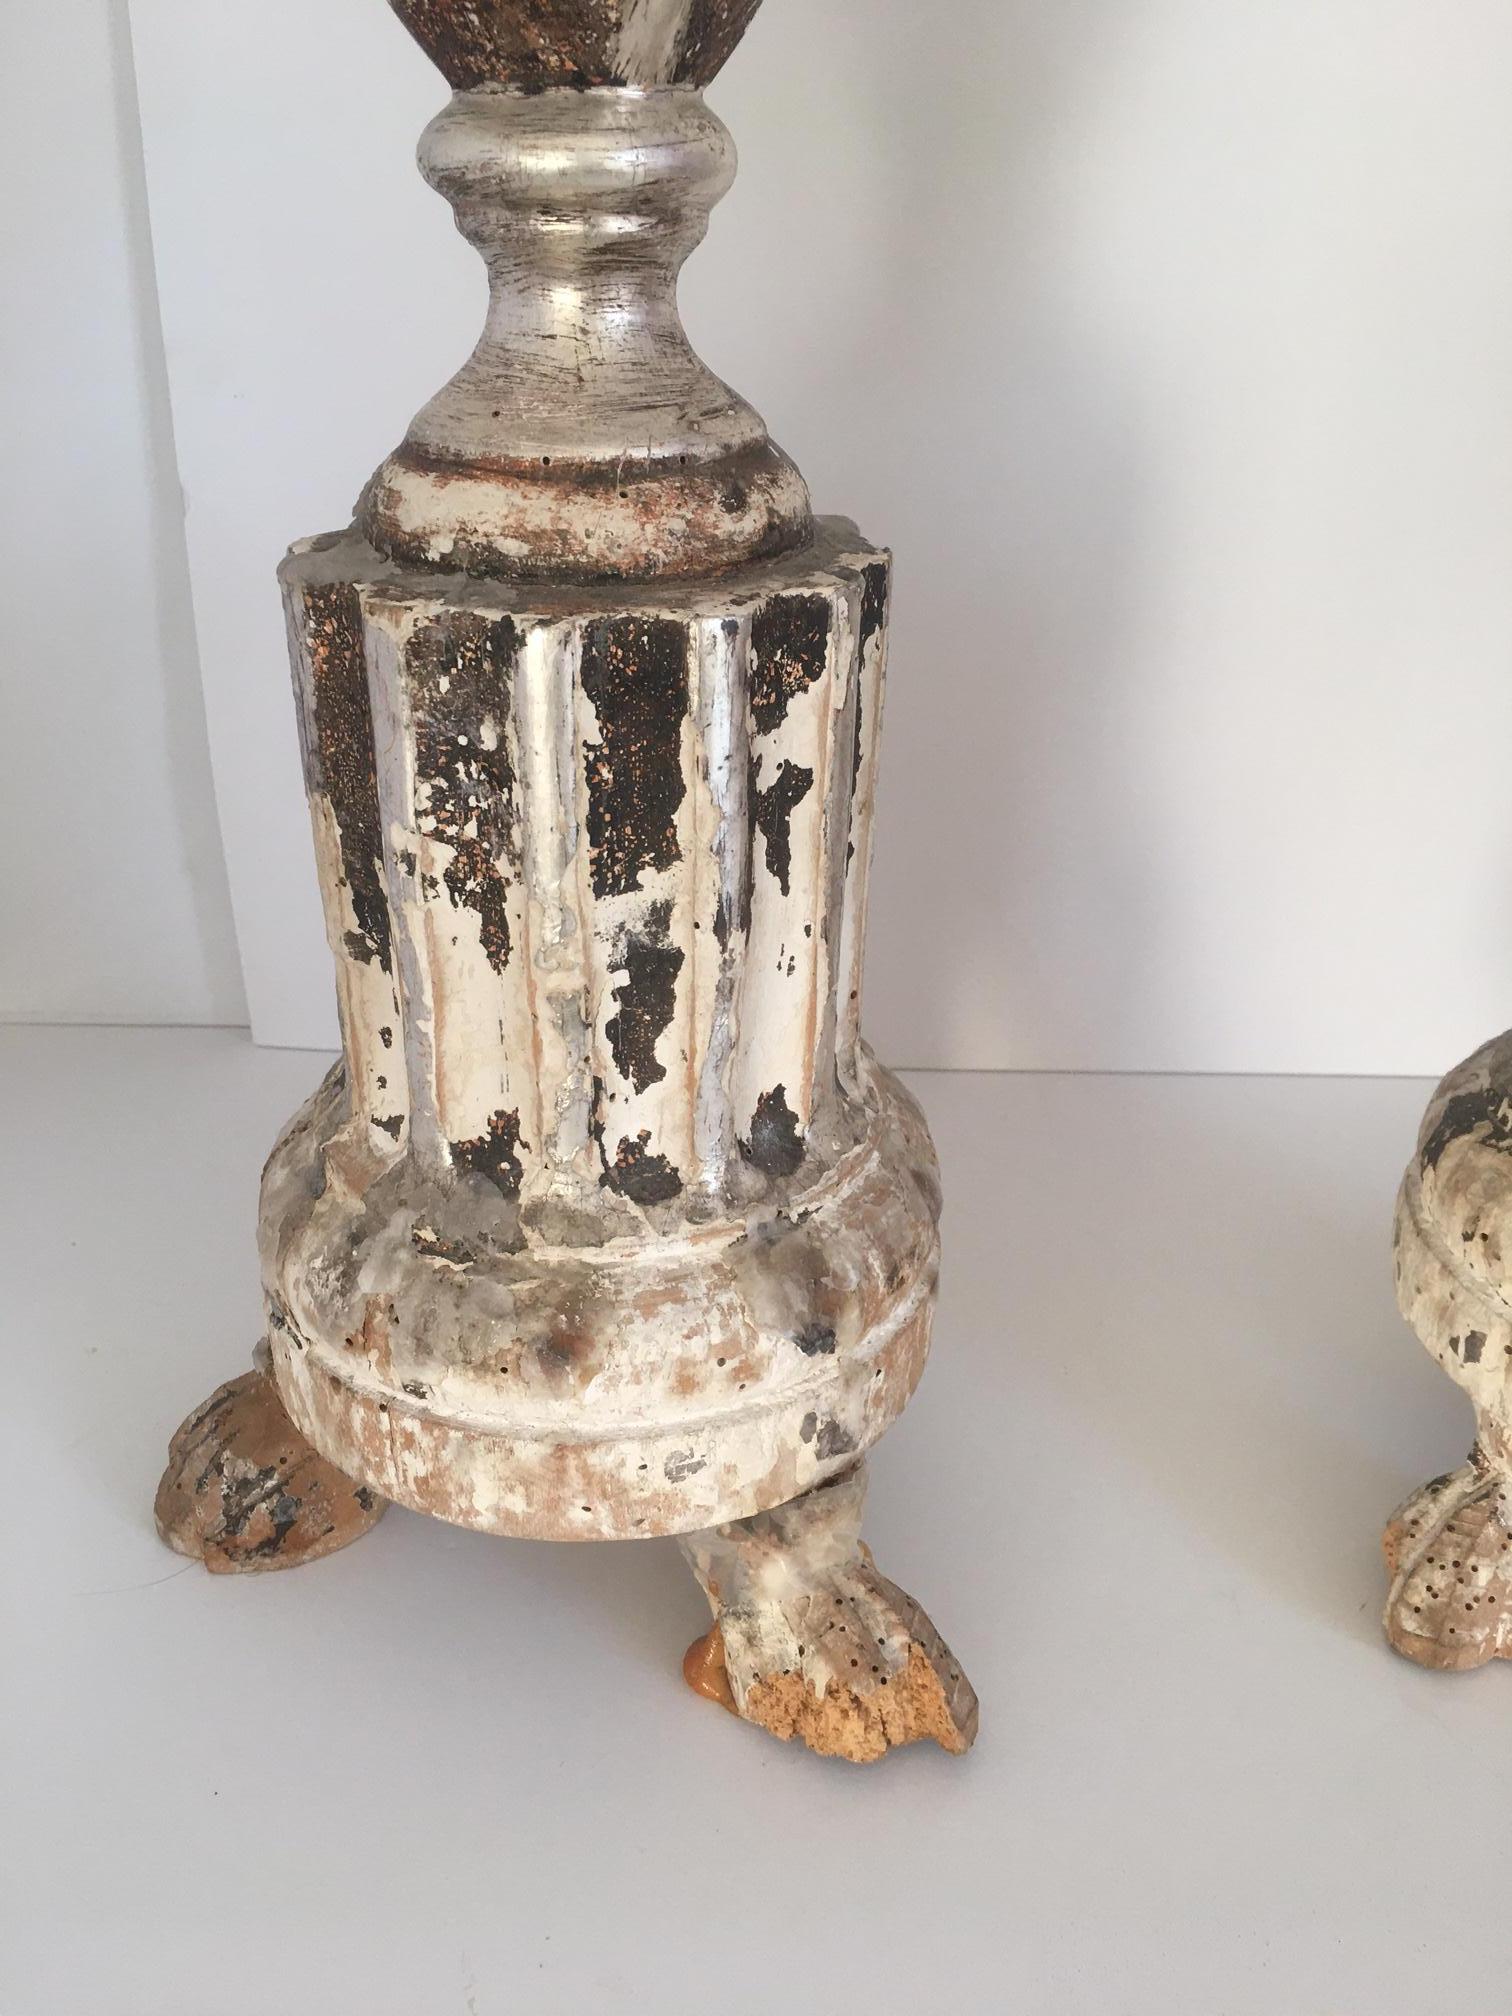 Pair of rustic silverleaf 19th century French candlesticks.